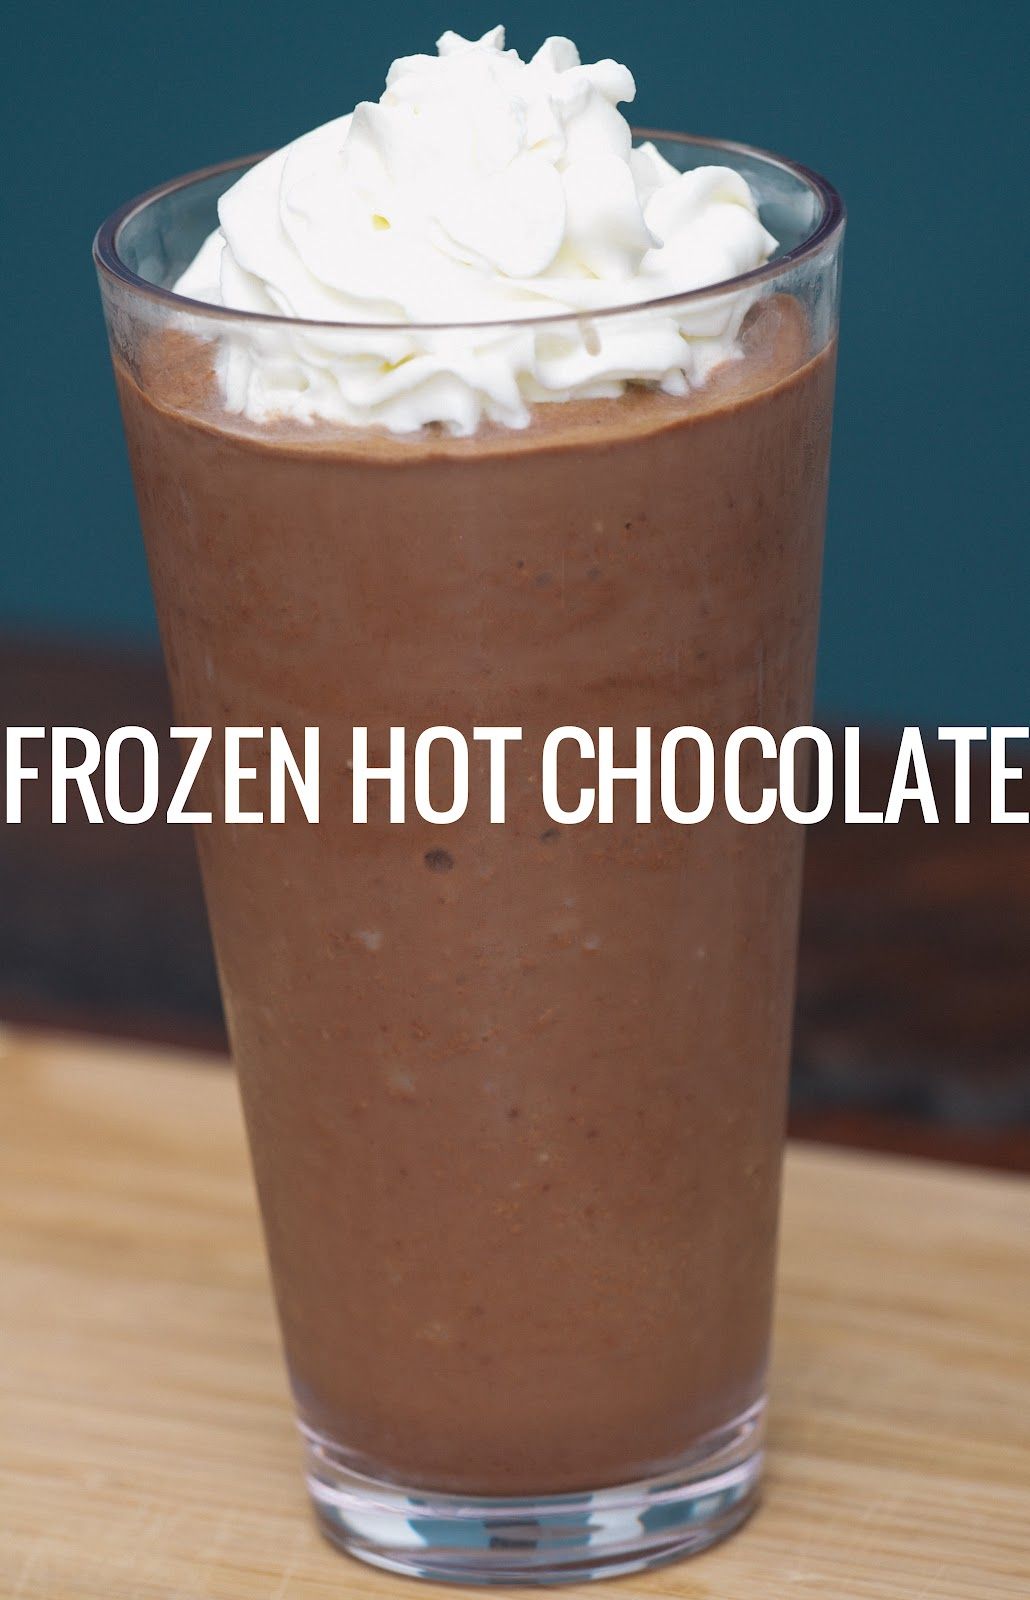 Frozen hot chocolate. Recipe from Serendipity Cafe in NYC.